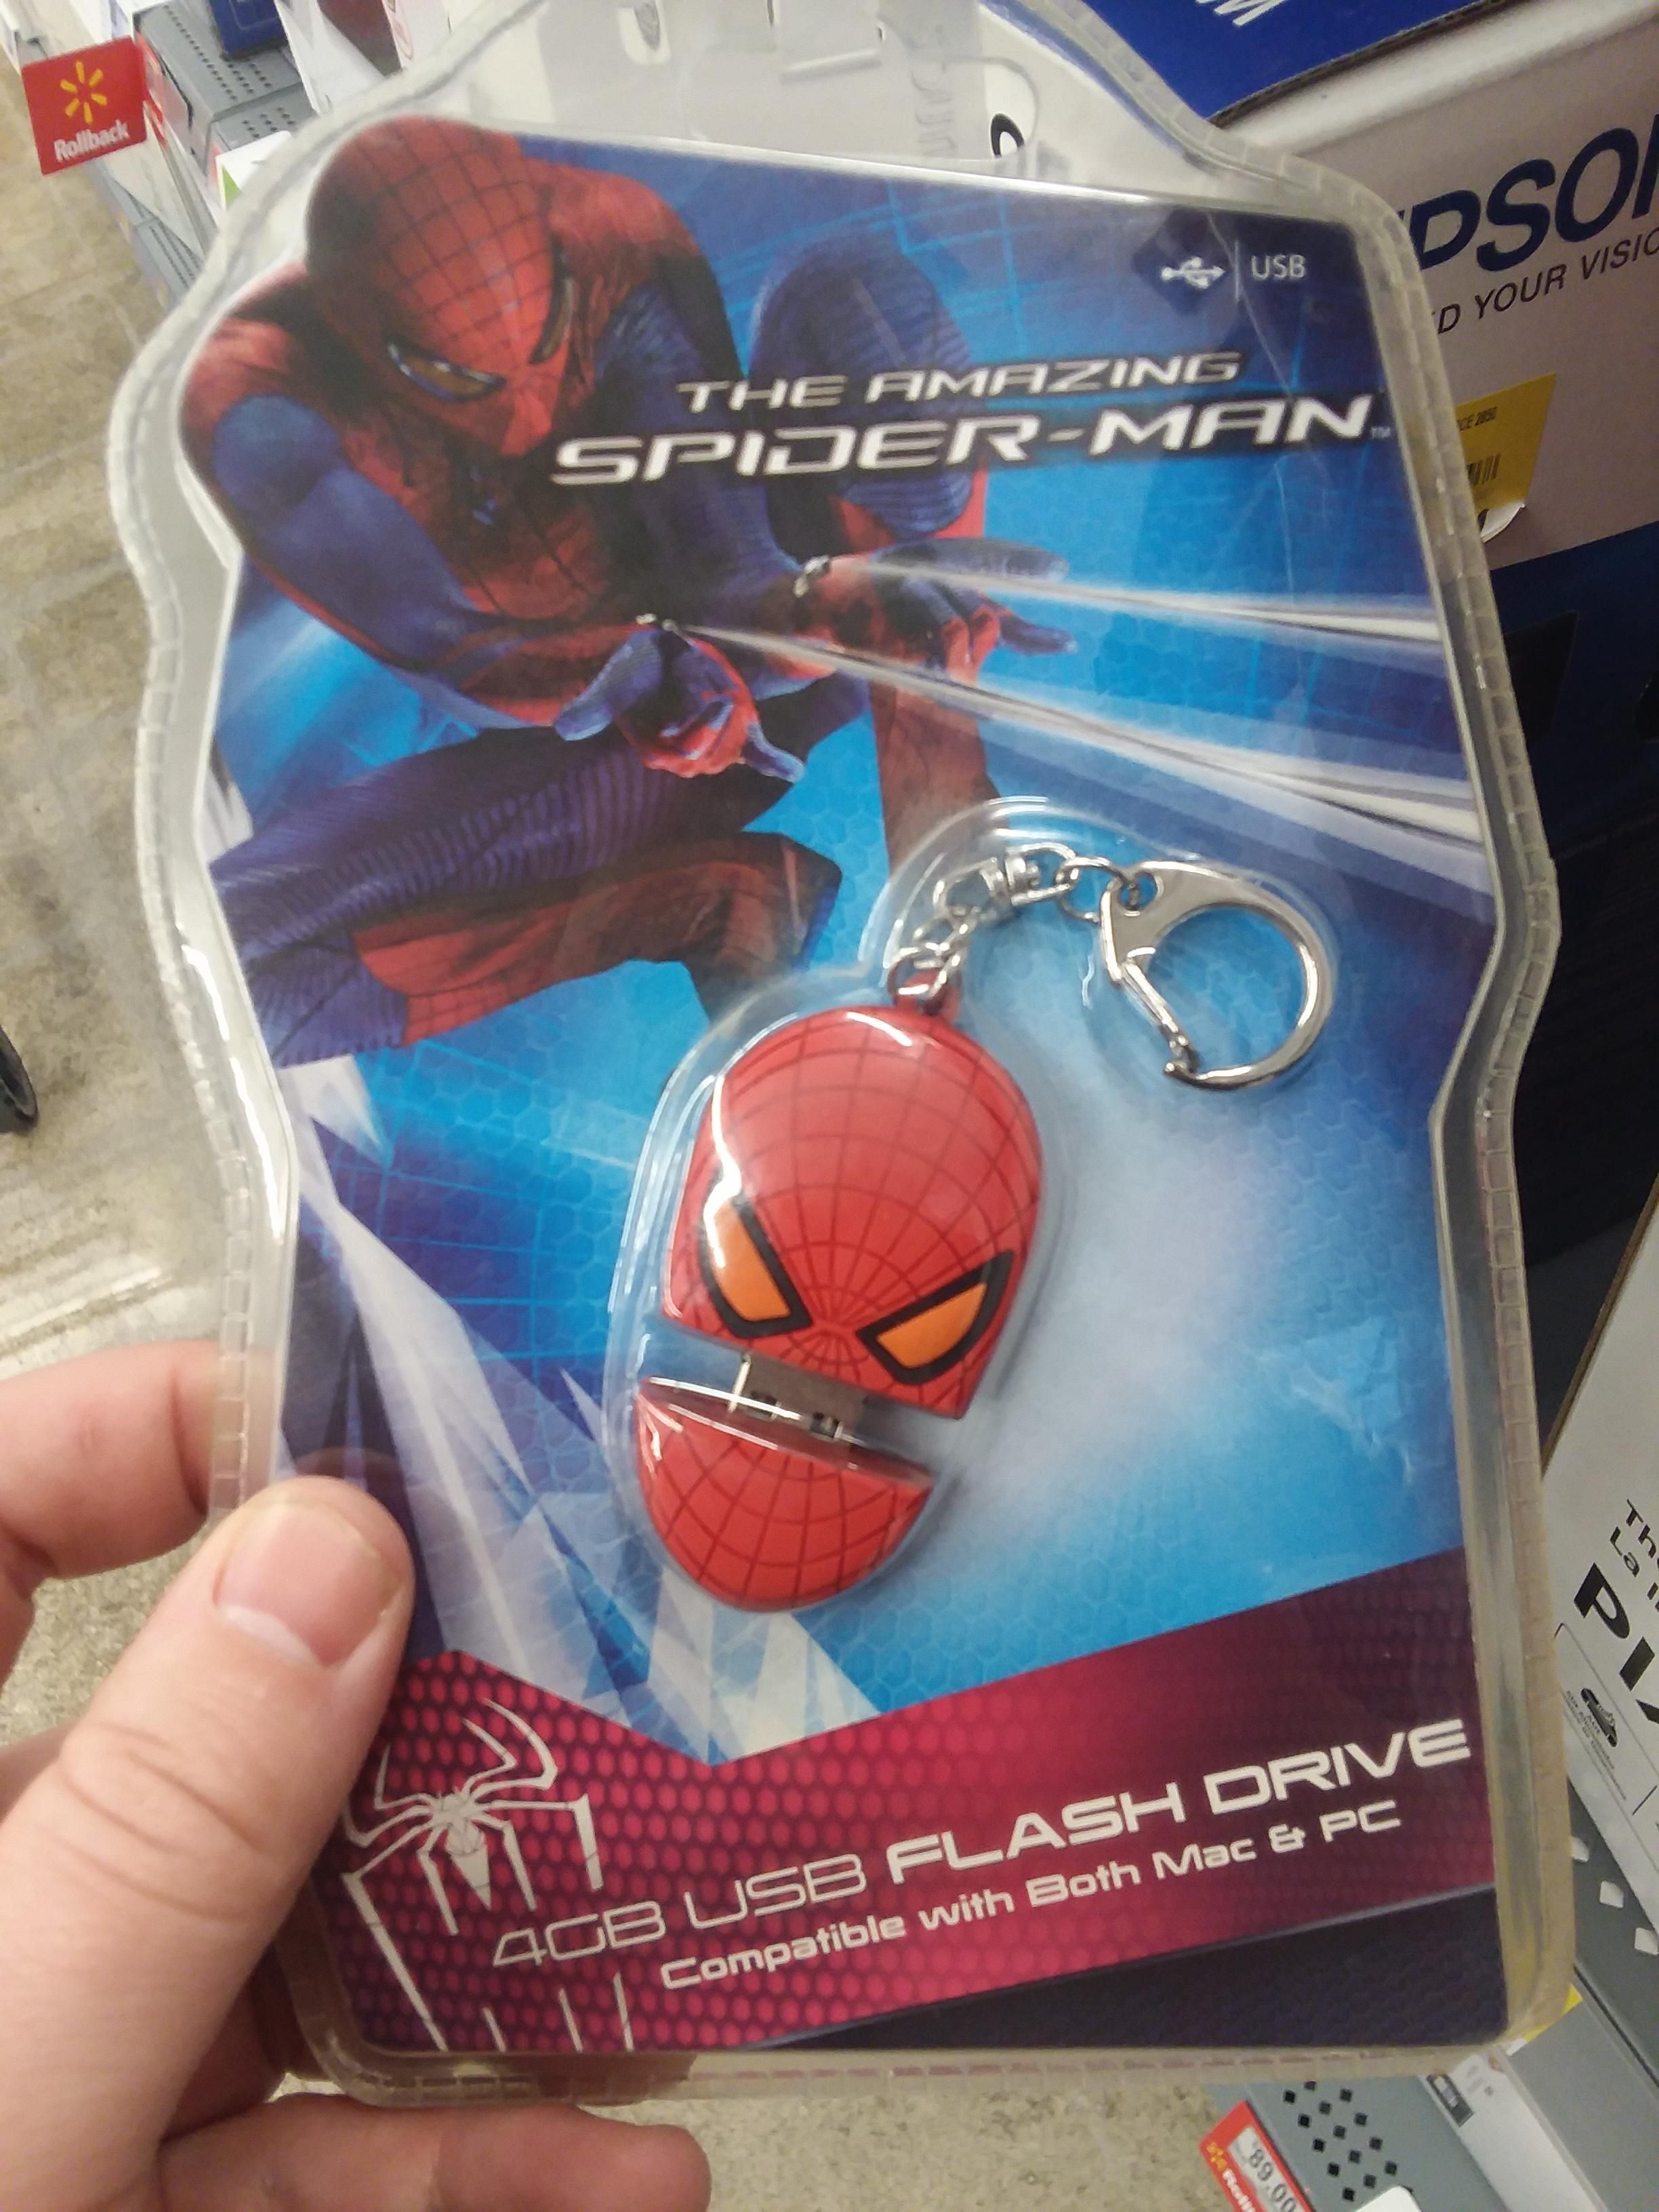 It's Canadian Spider-Man!